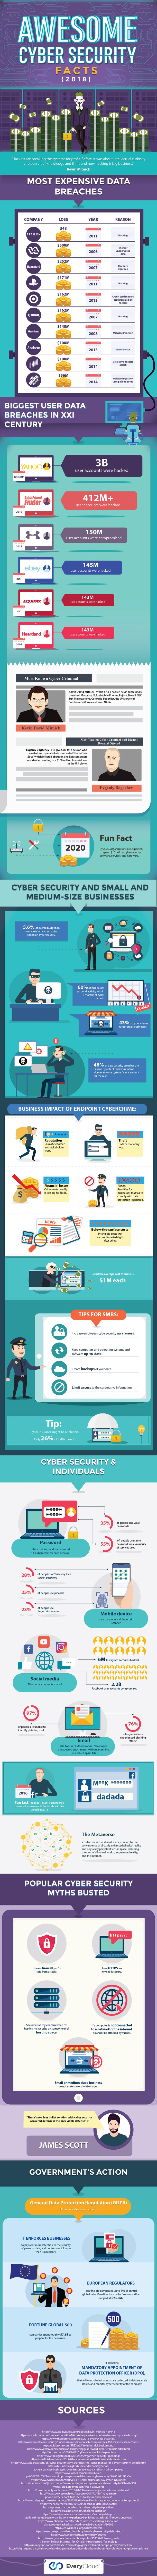 awesome-cyber-security-facts-infographic